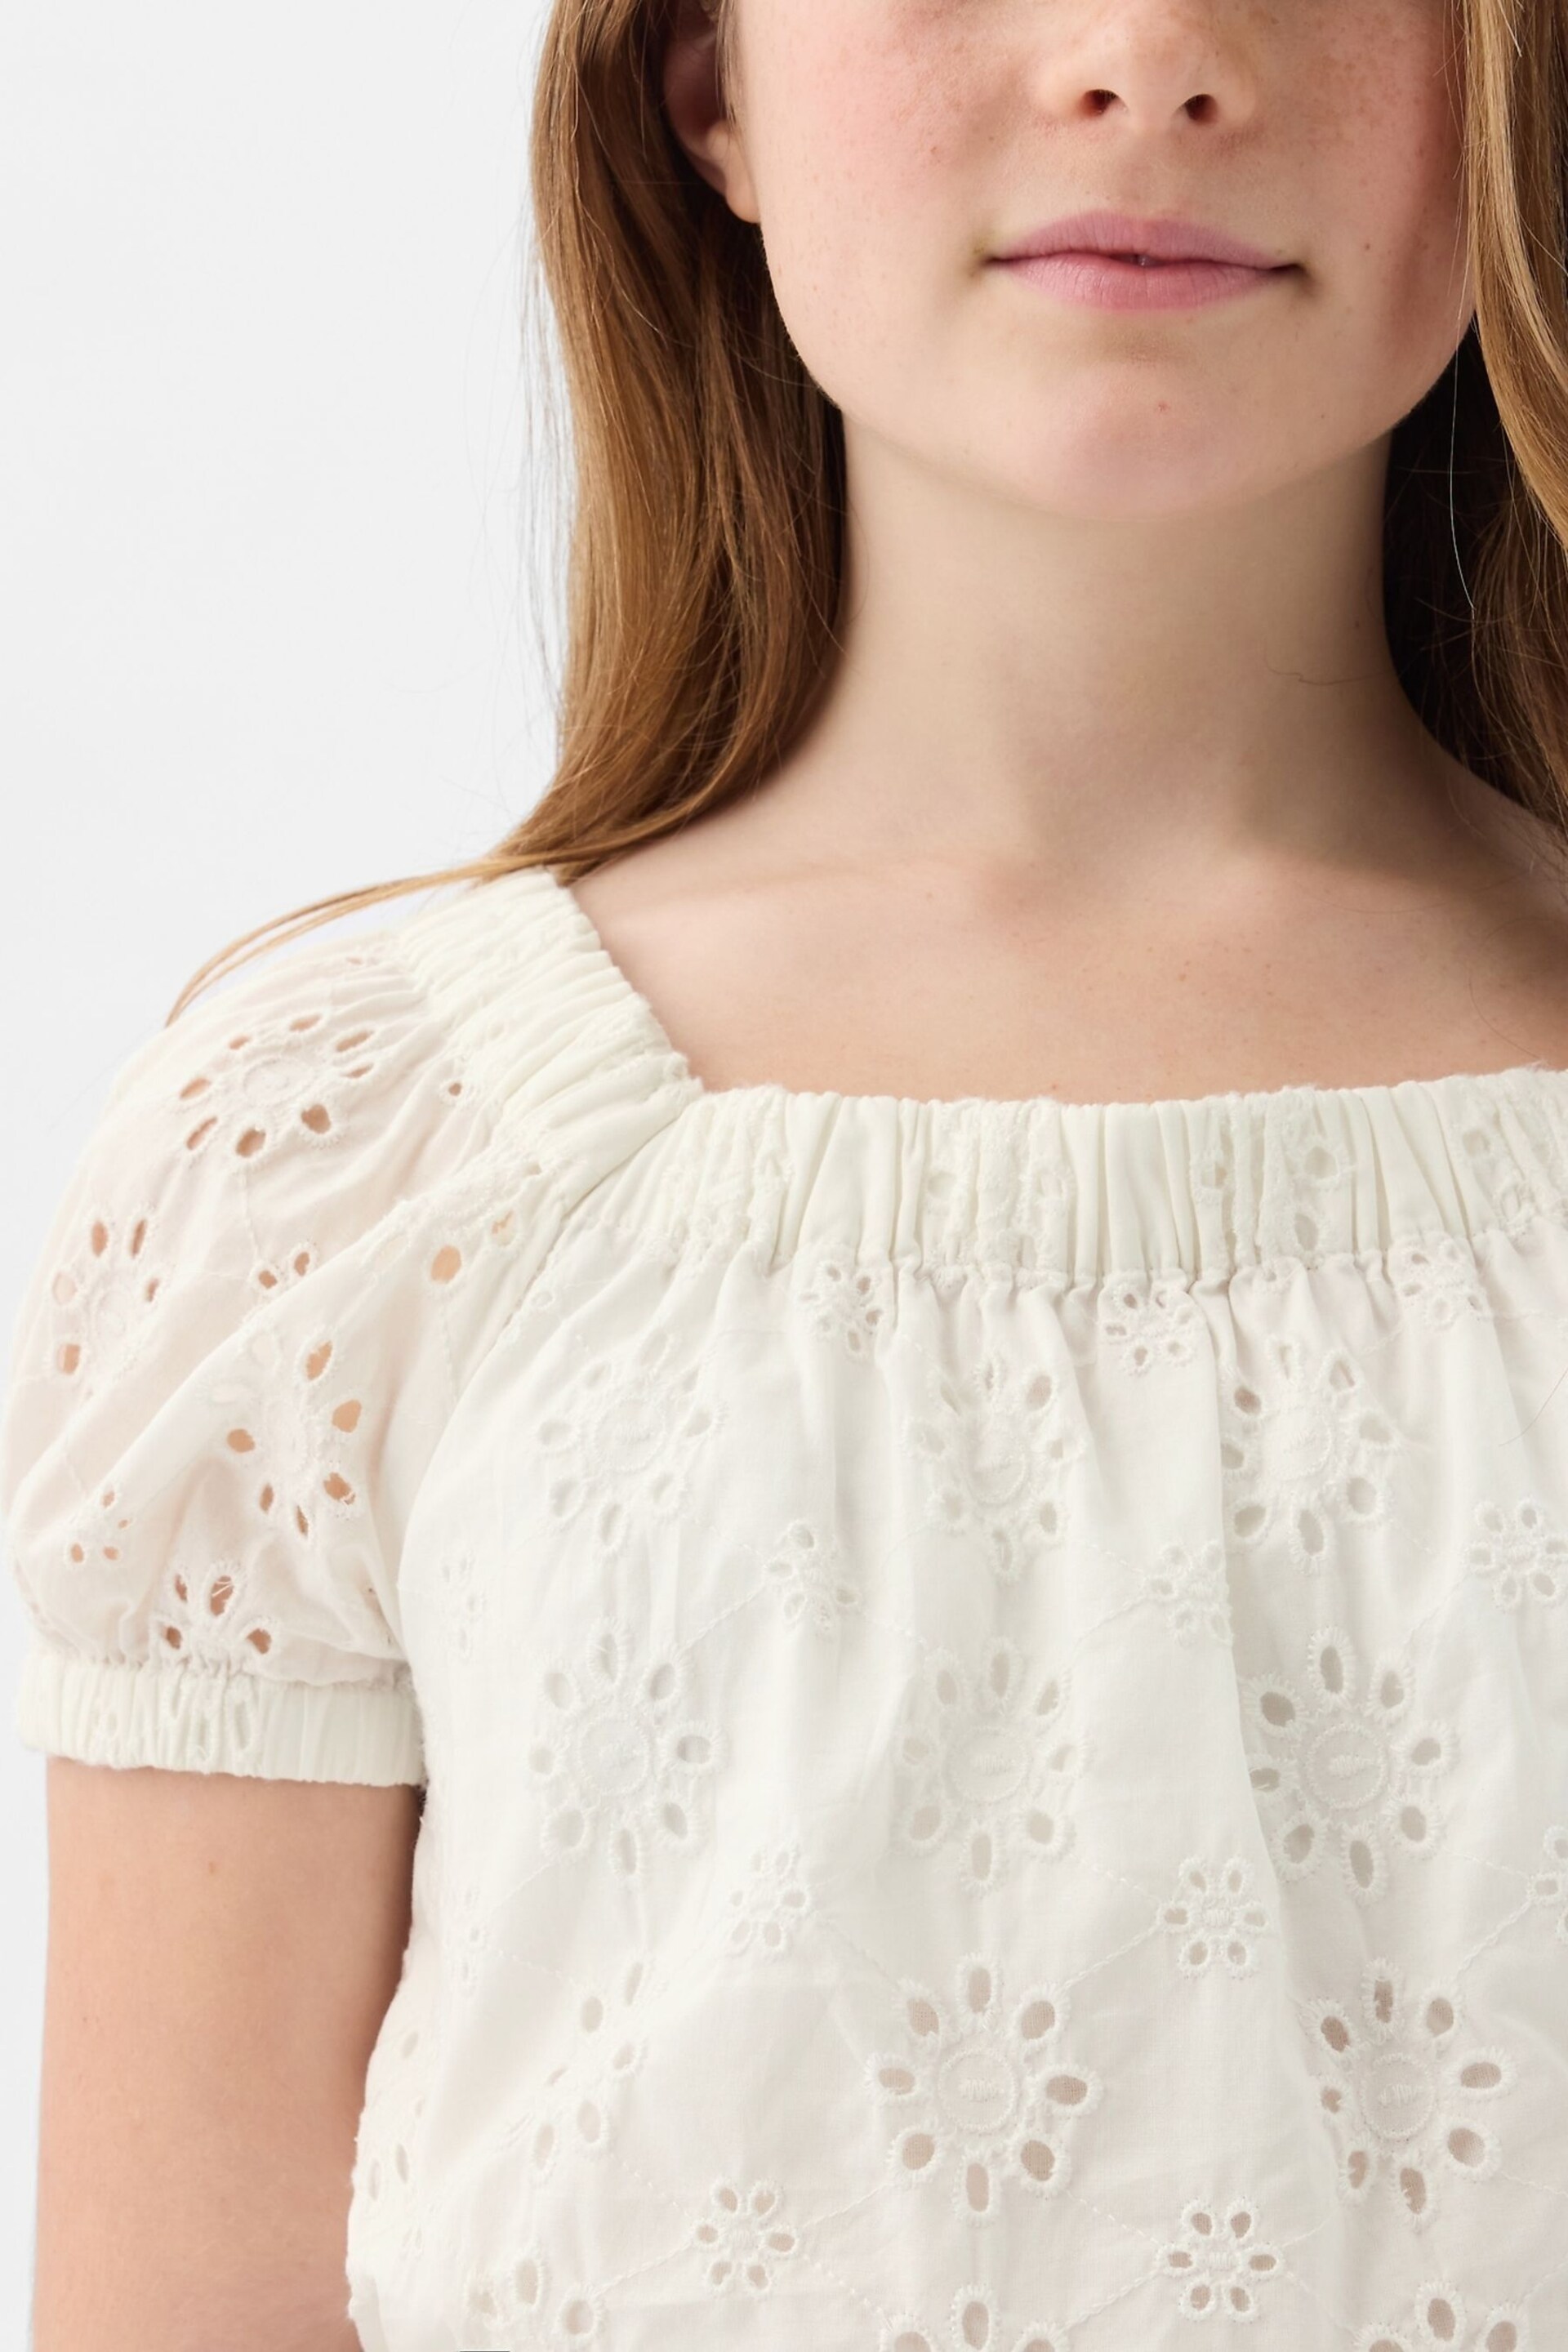 Gap White Floral Puff Sleeve Top (4-13yrs) - Image 4 of 4